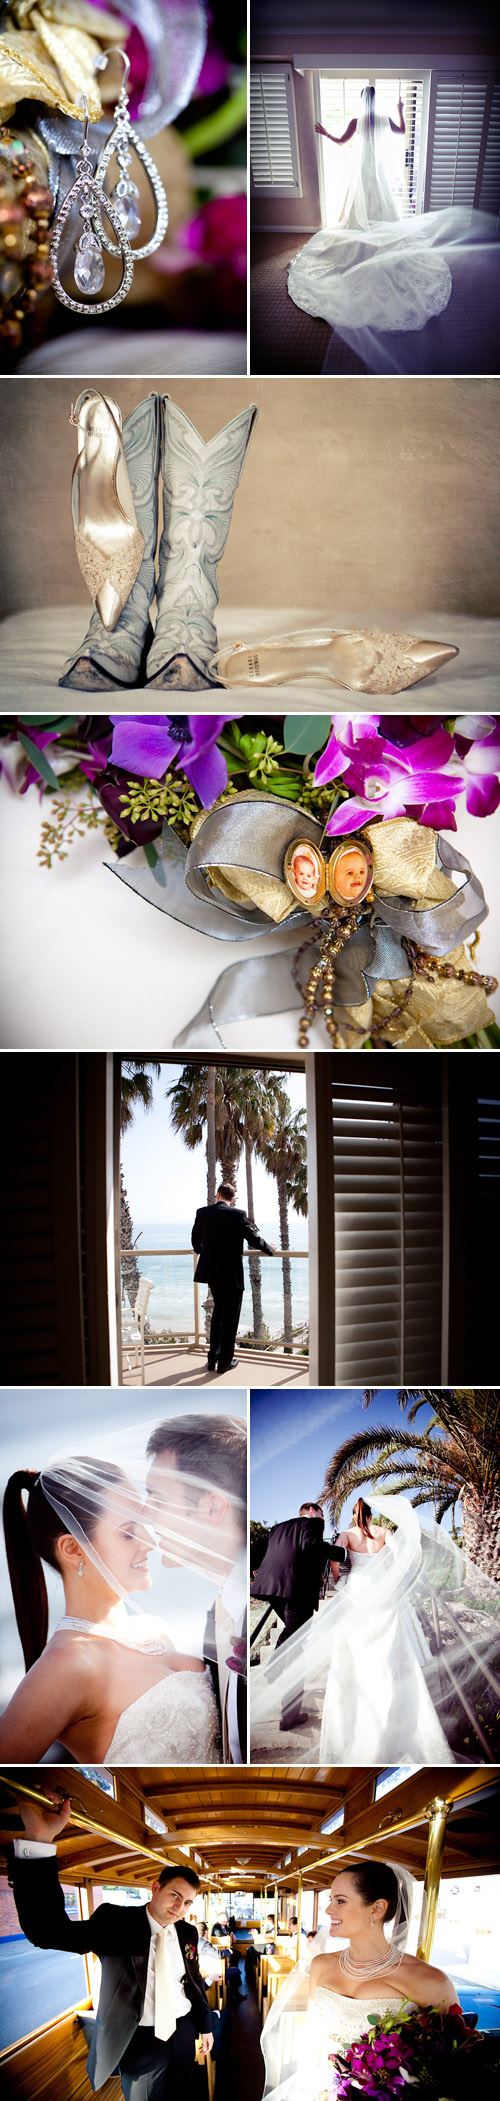 Laguna Beach art gallery real wedding, images by Callaway Gable Photography